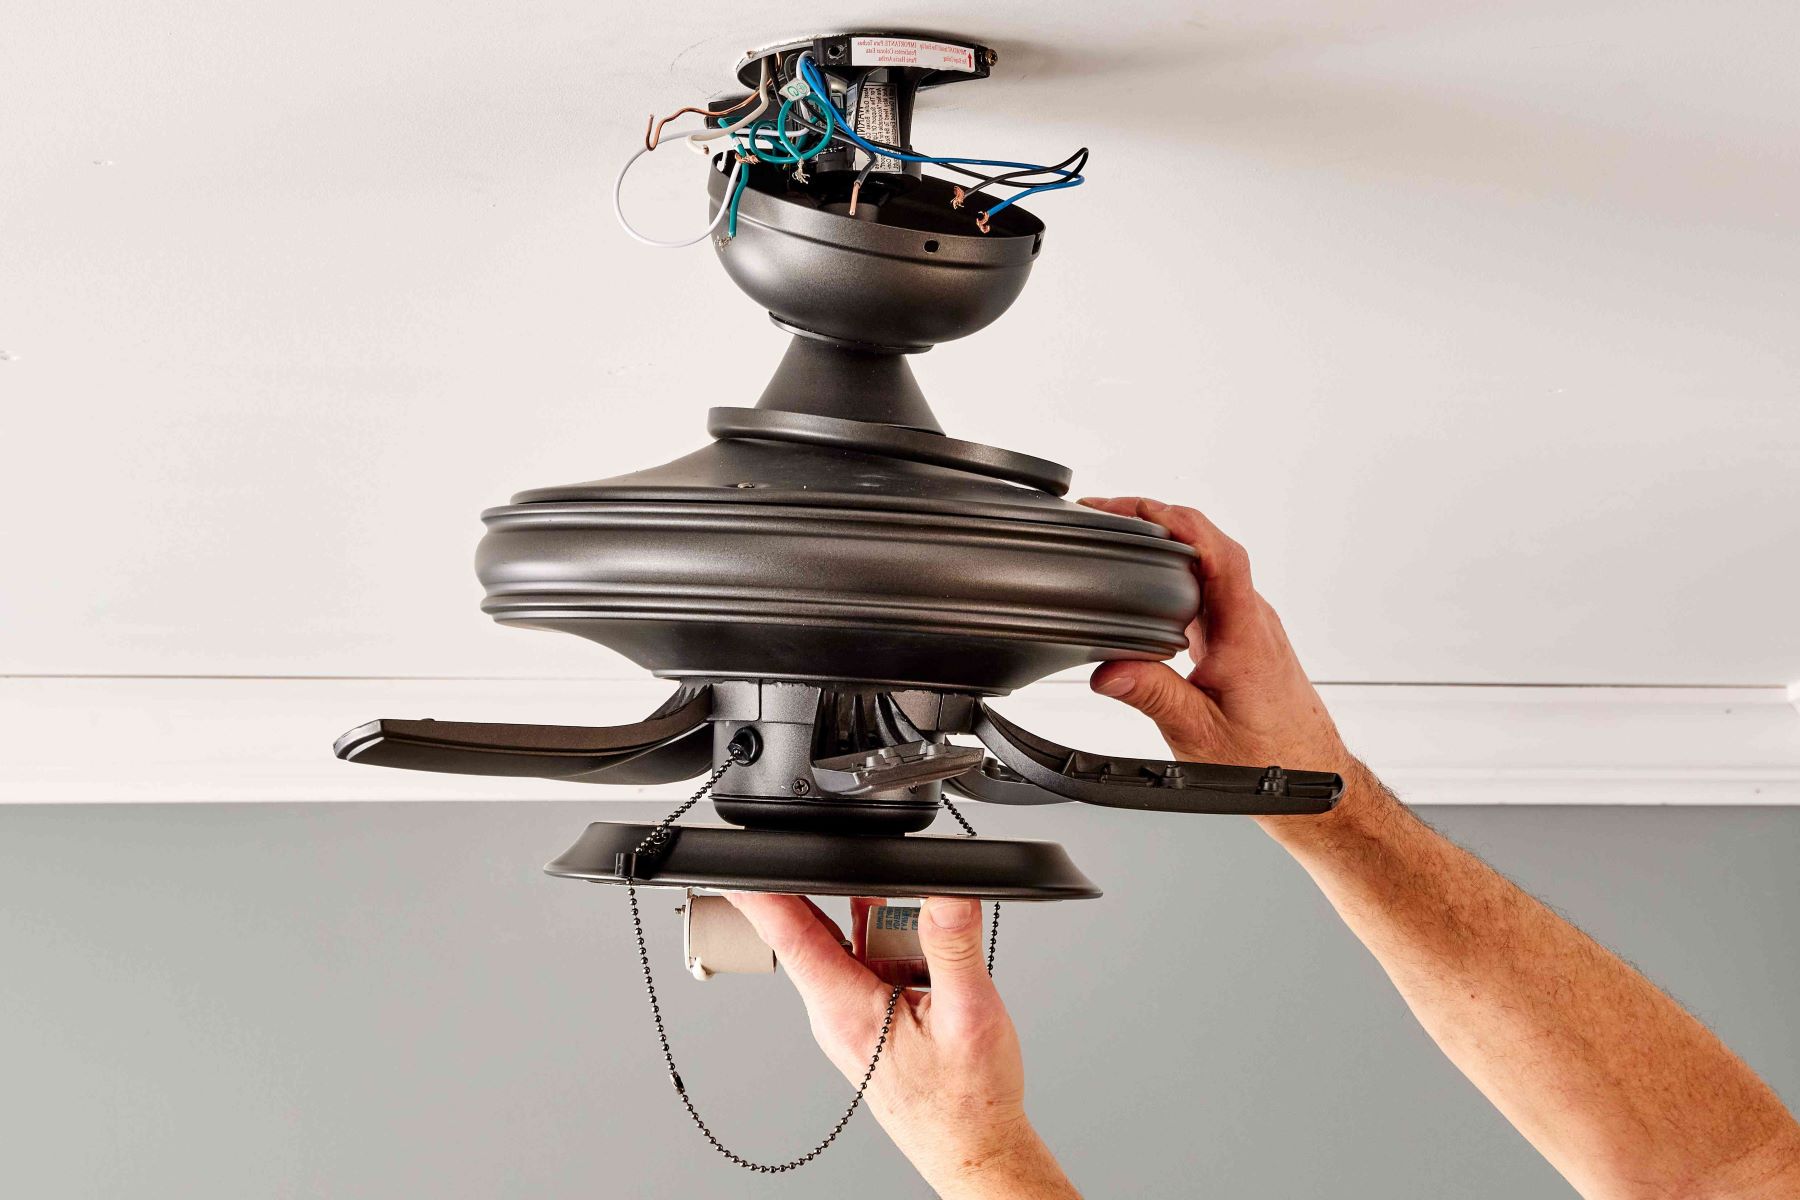 How To Remove A Ceiling Fan